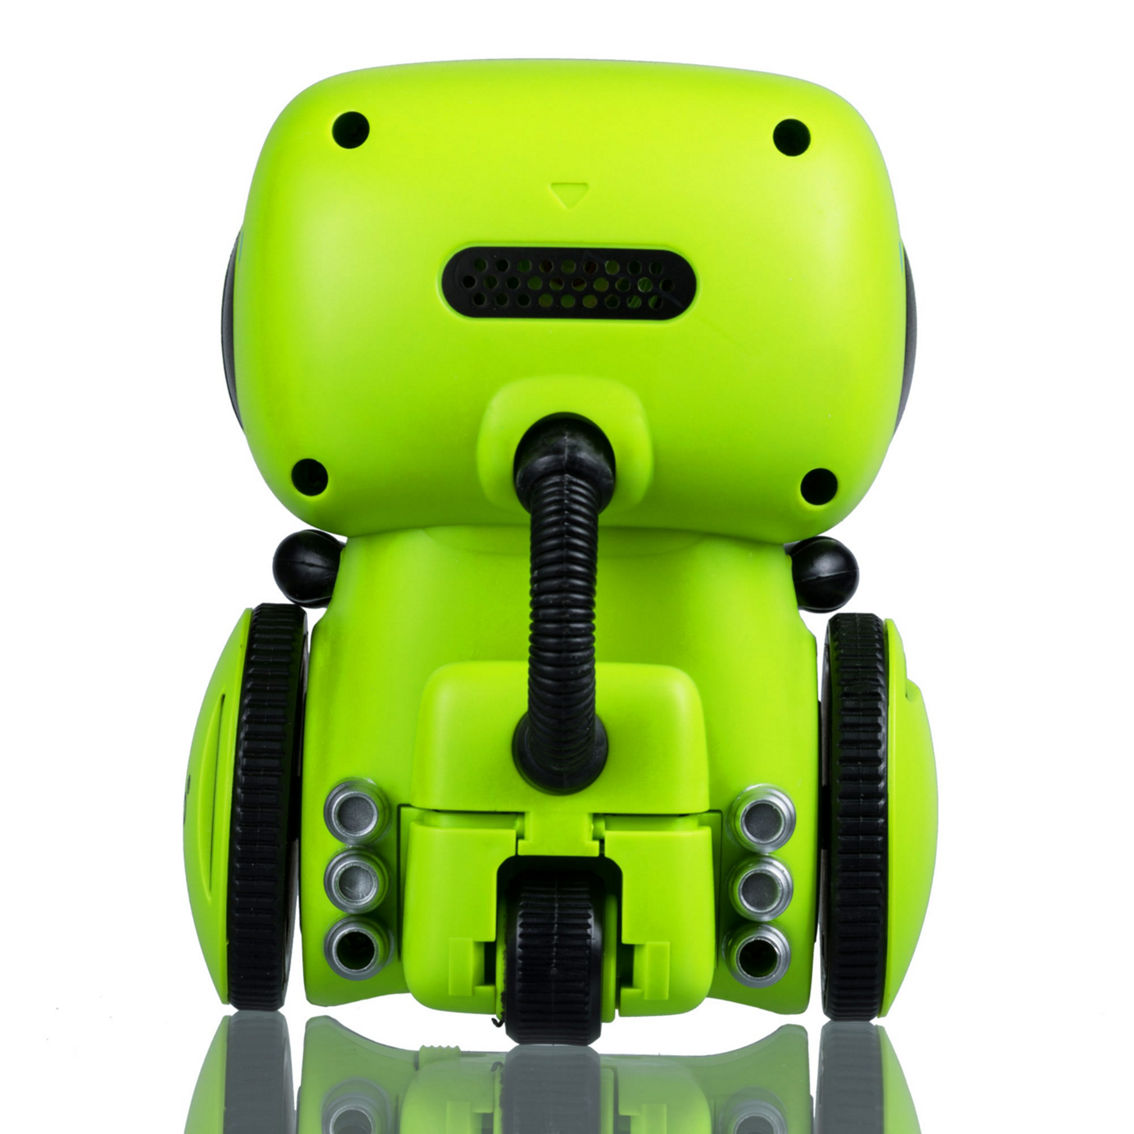 Contixo R1 Learning Educational Kids Robot, Green - Image 2 of 4